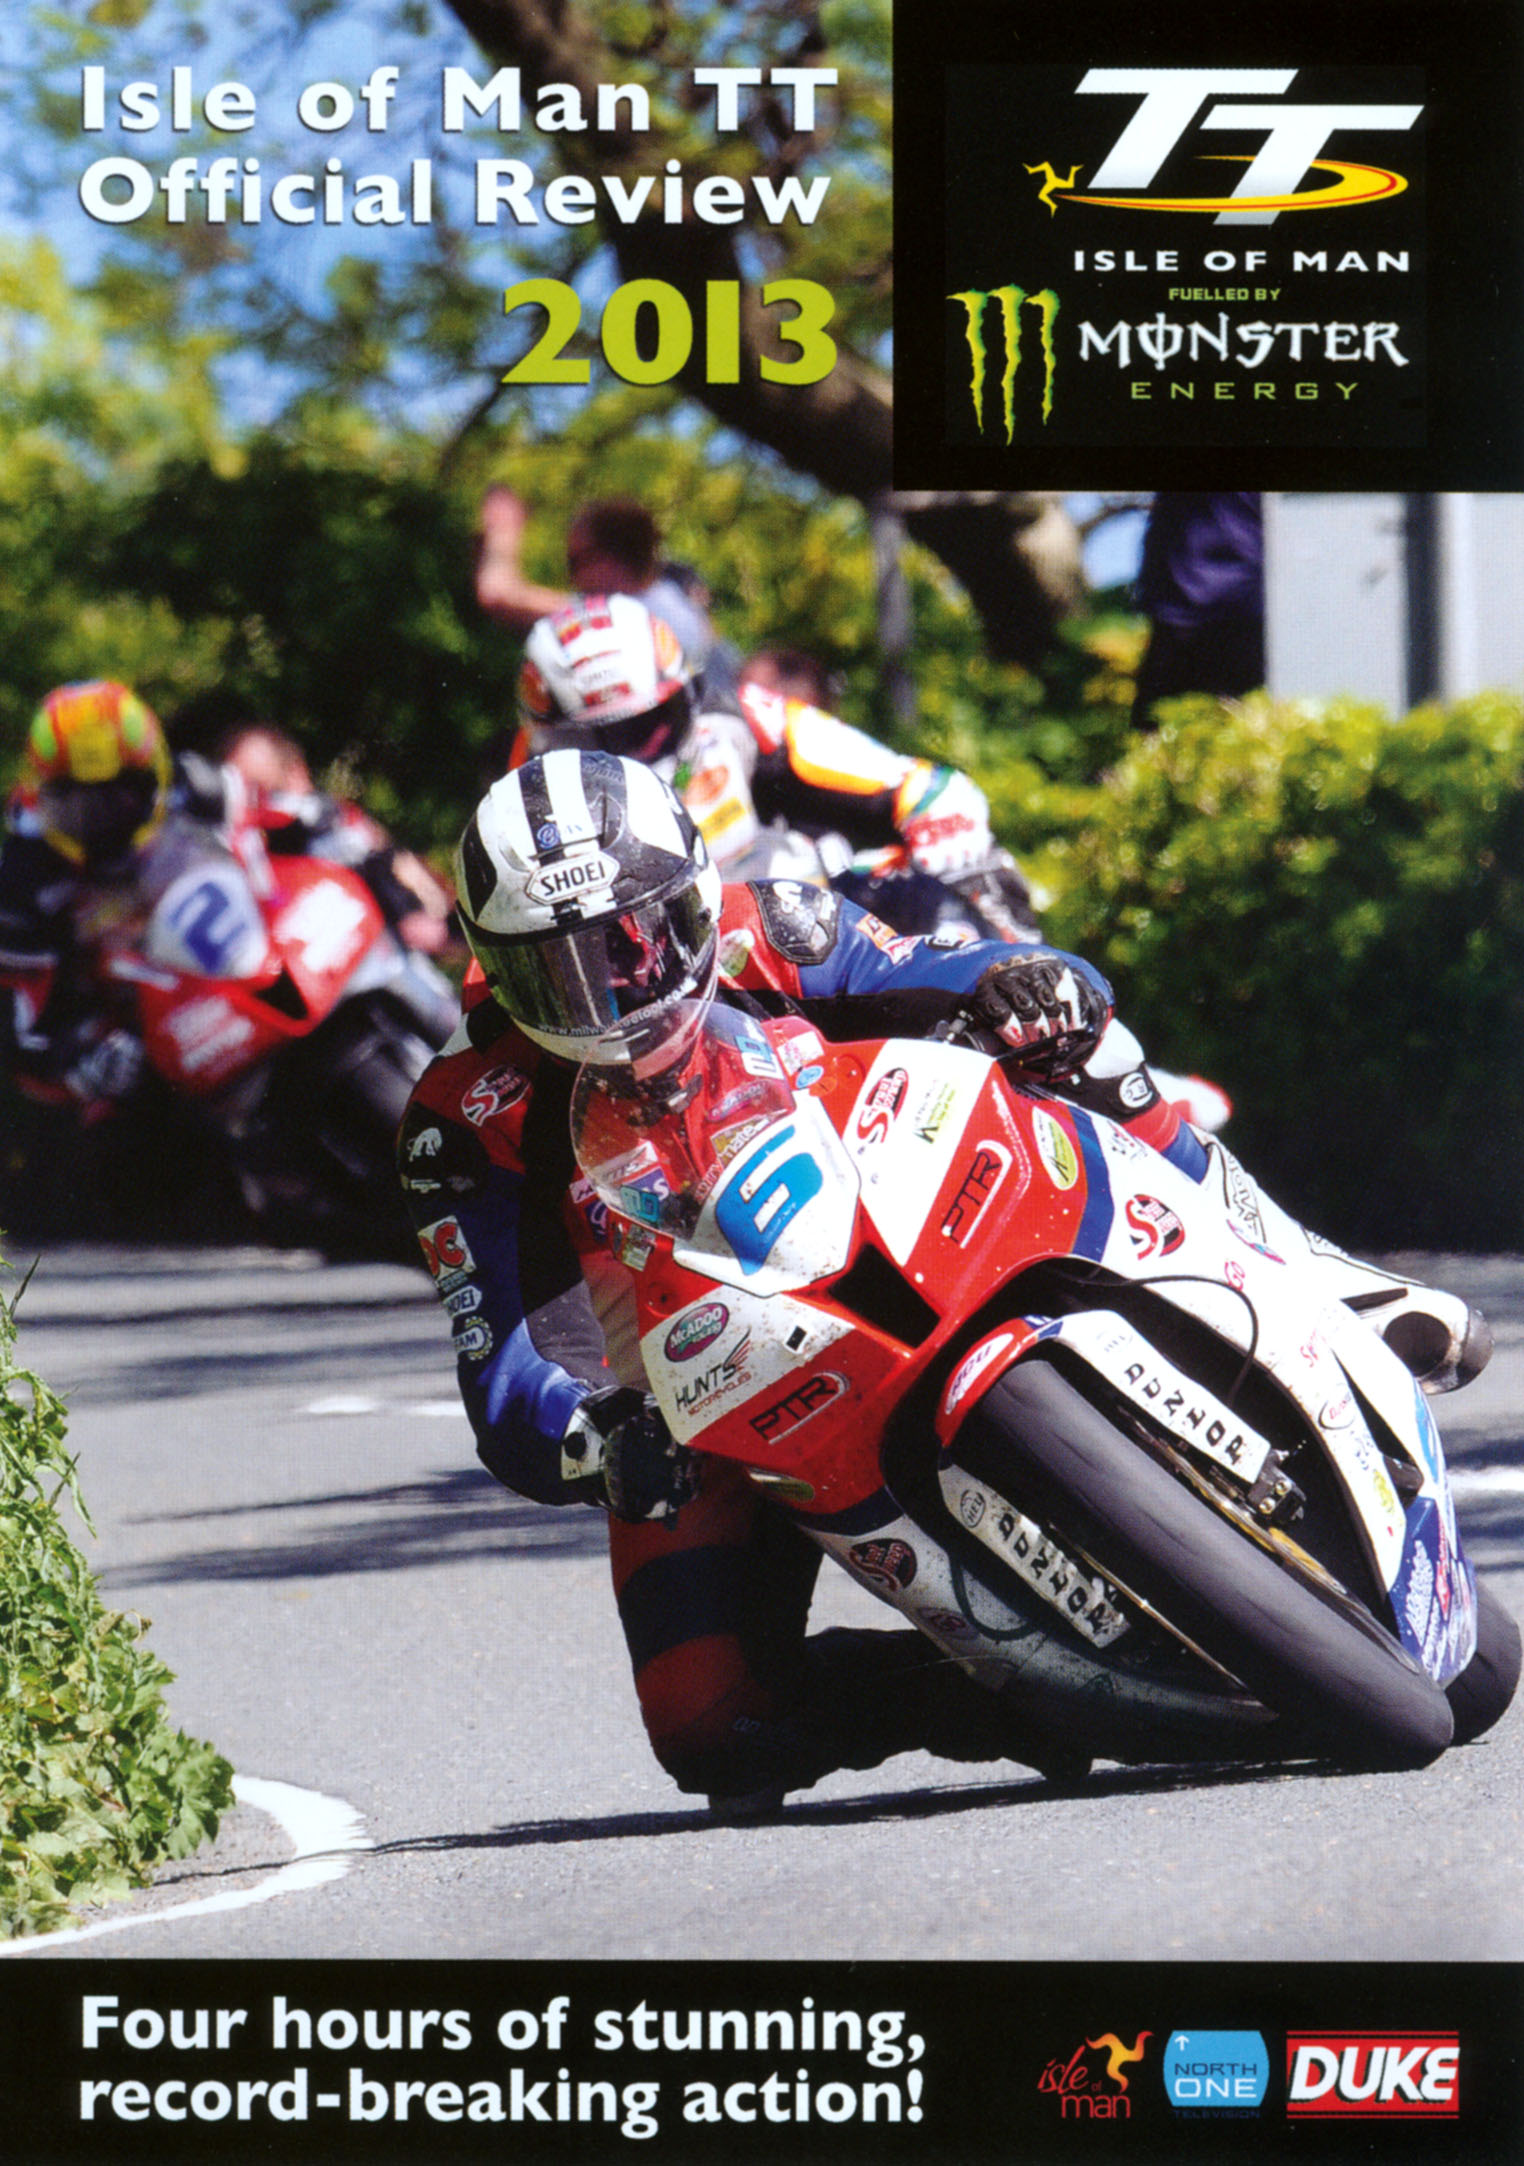 Best Buy: Isle of Man TT 2013 Official Review [DVD] [2013]